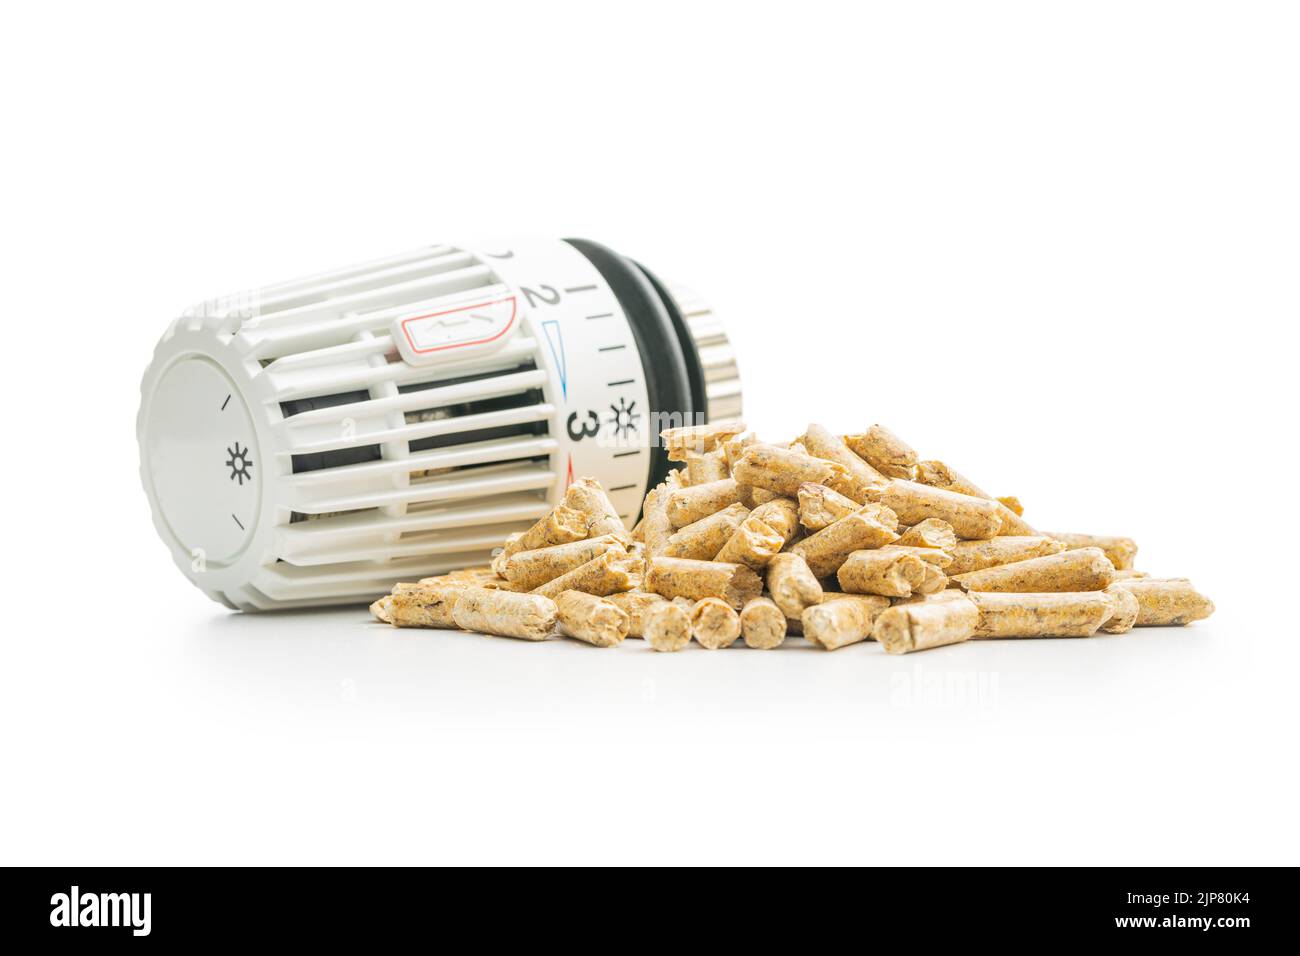 Wooden pellets and thermostatic valve head isolated on a white background. Biomass - Renewable source of heating. Stock Photo